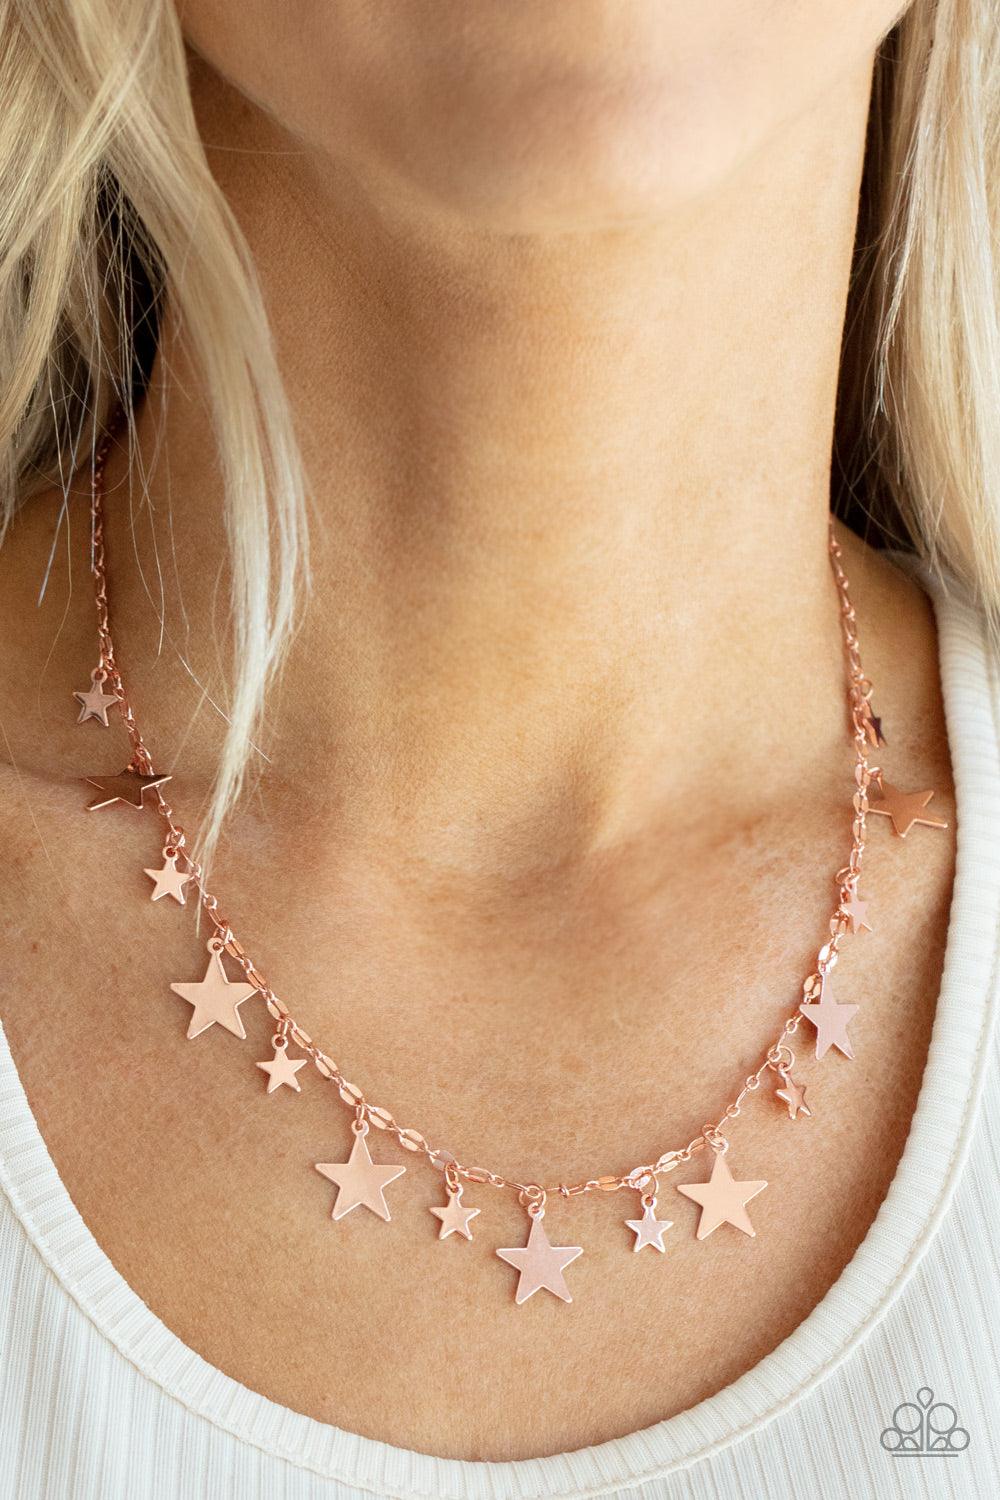 Starry Shindig Copper Necklace - Jewelry by Bretta